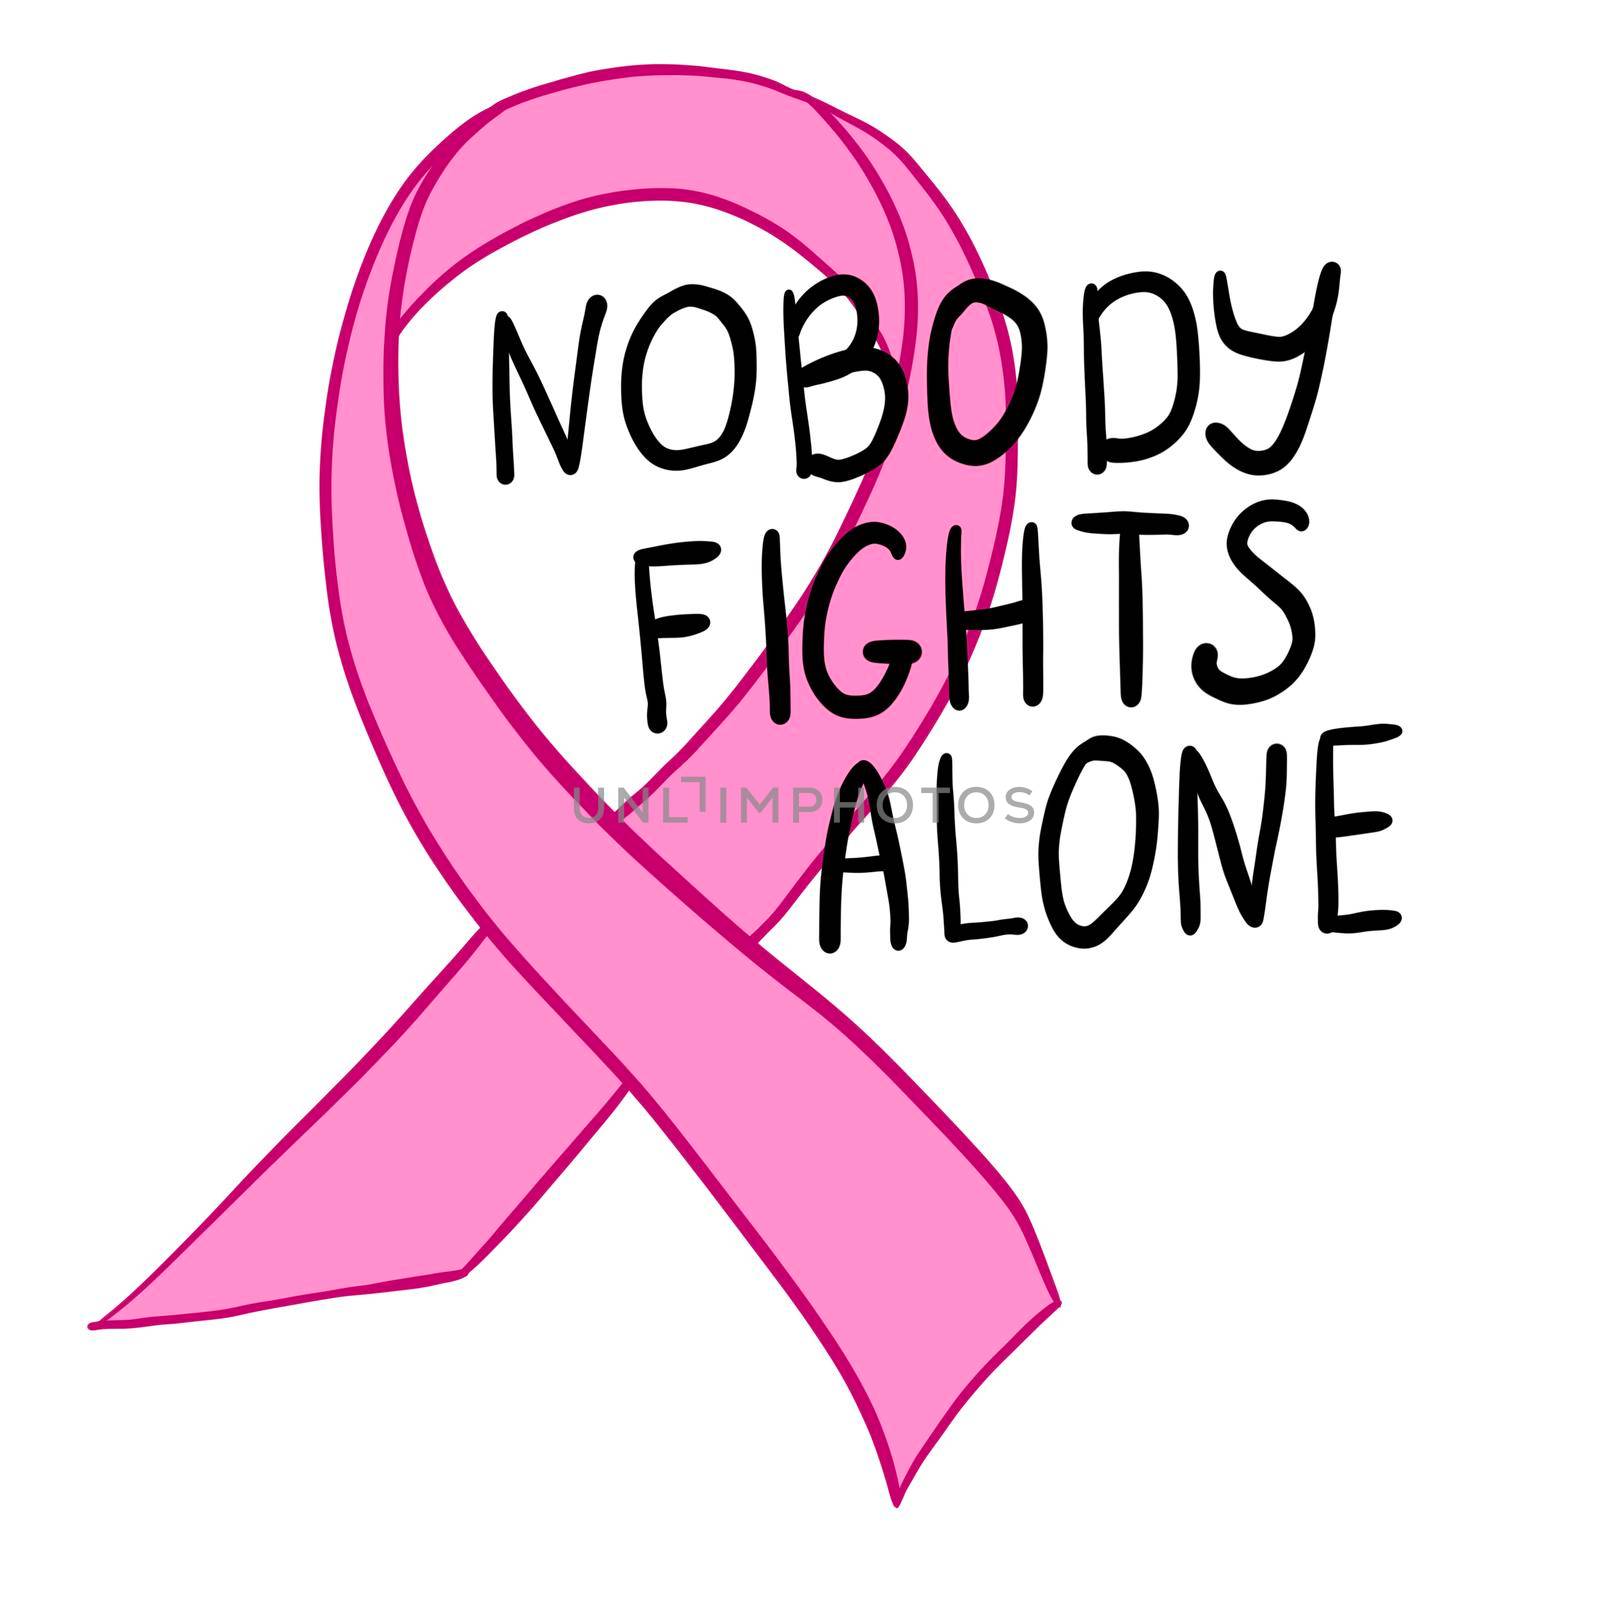 Nobody fights alone. Breast cancer awareness month hand drawn illustration in black and pink. Disease illness ribbon for health protection, medical prevention concept. Women's healthcare design. by Lagmar